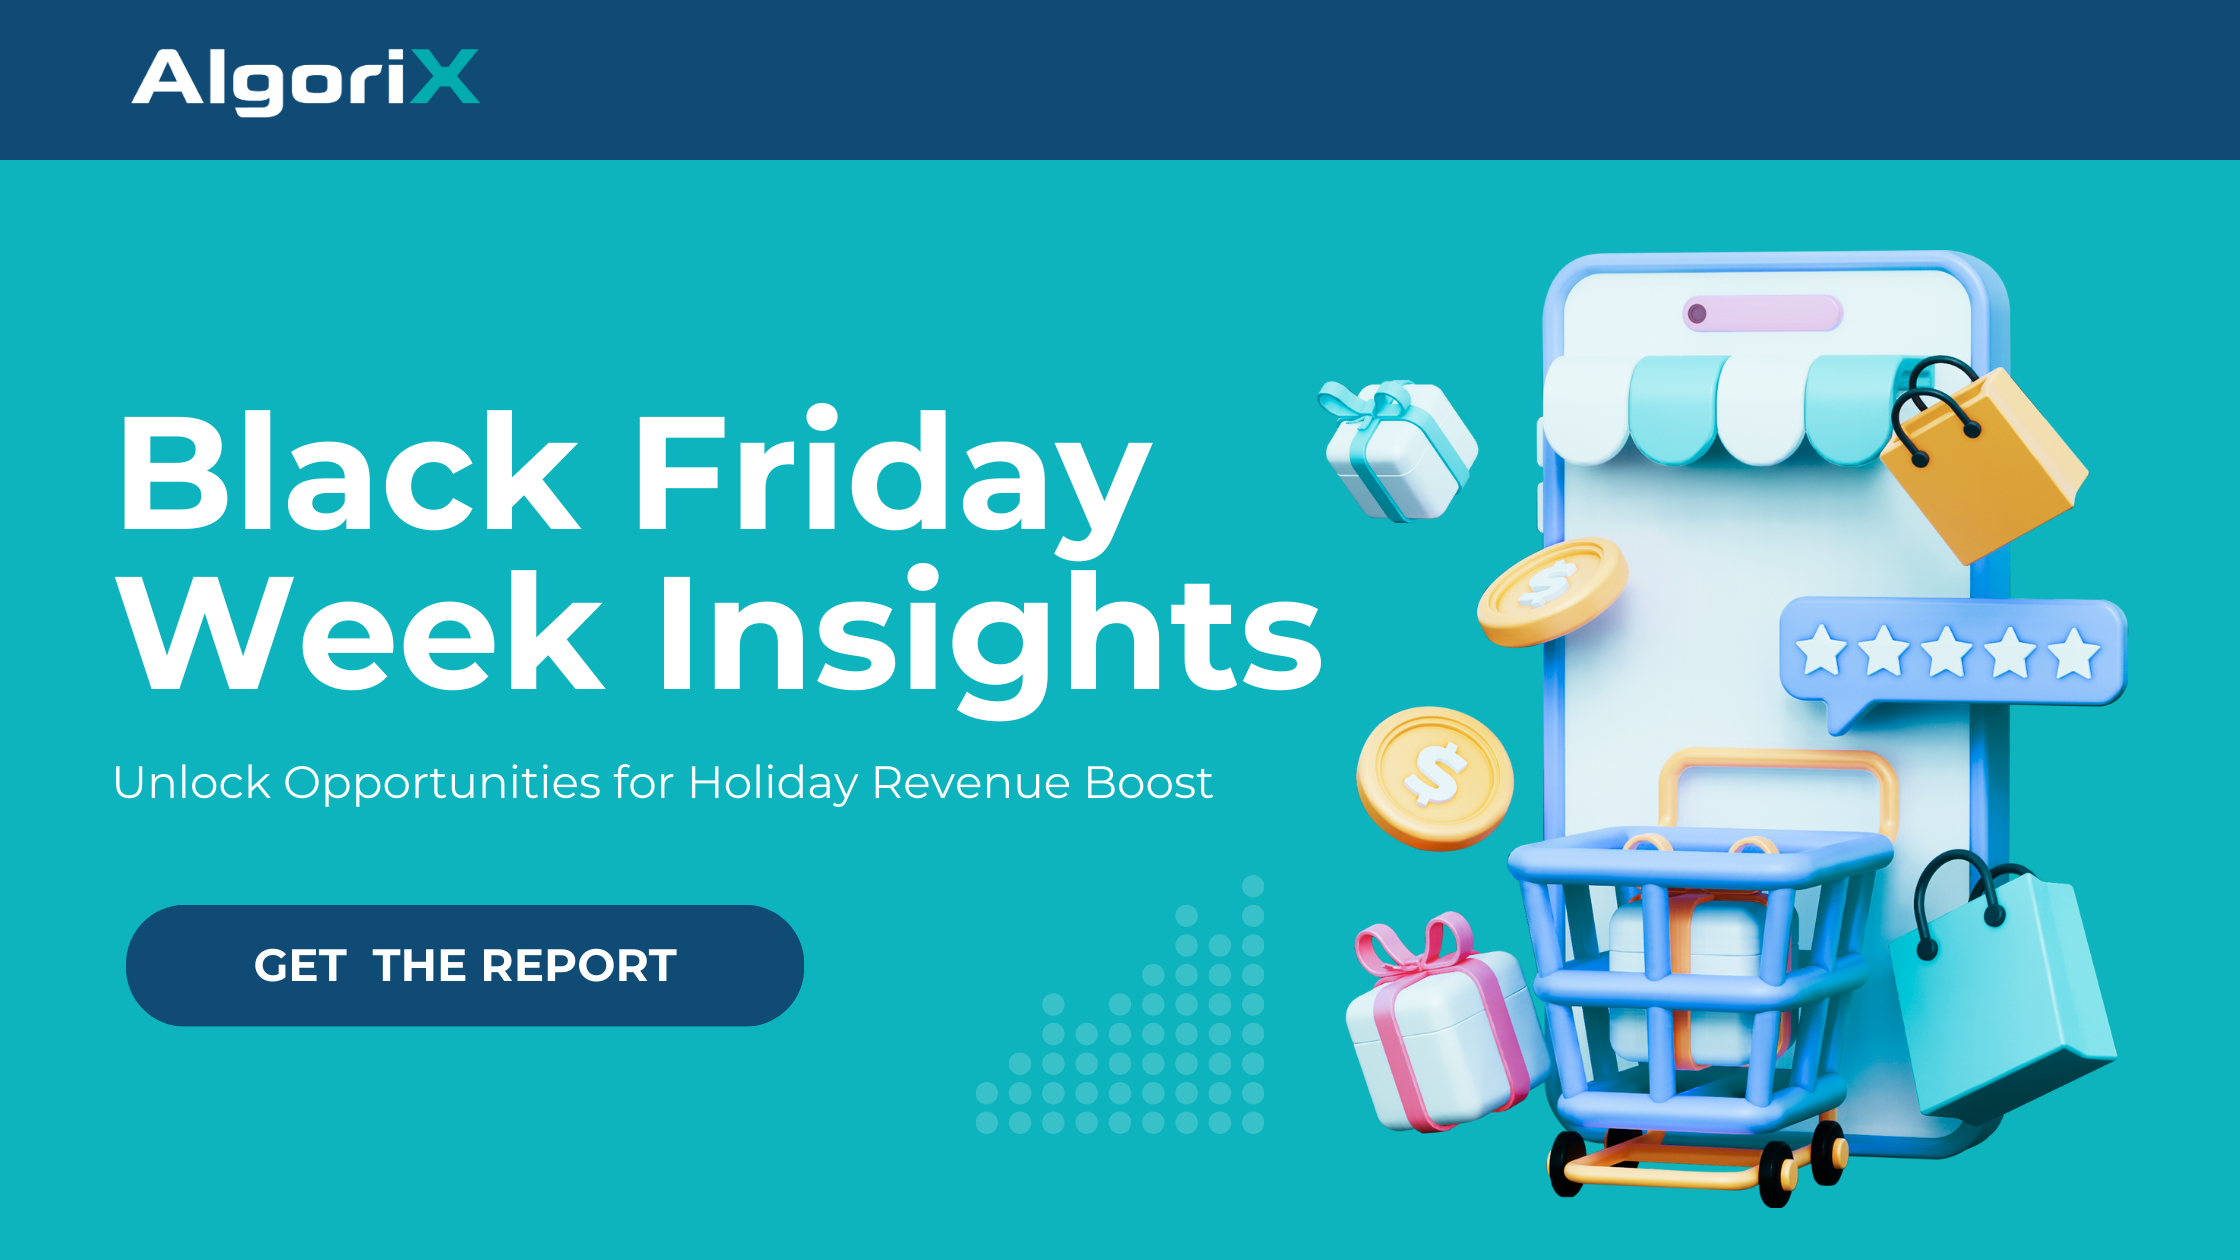 Black Friday Insights Report for Monetization Opportunities and Advertising Trends